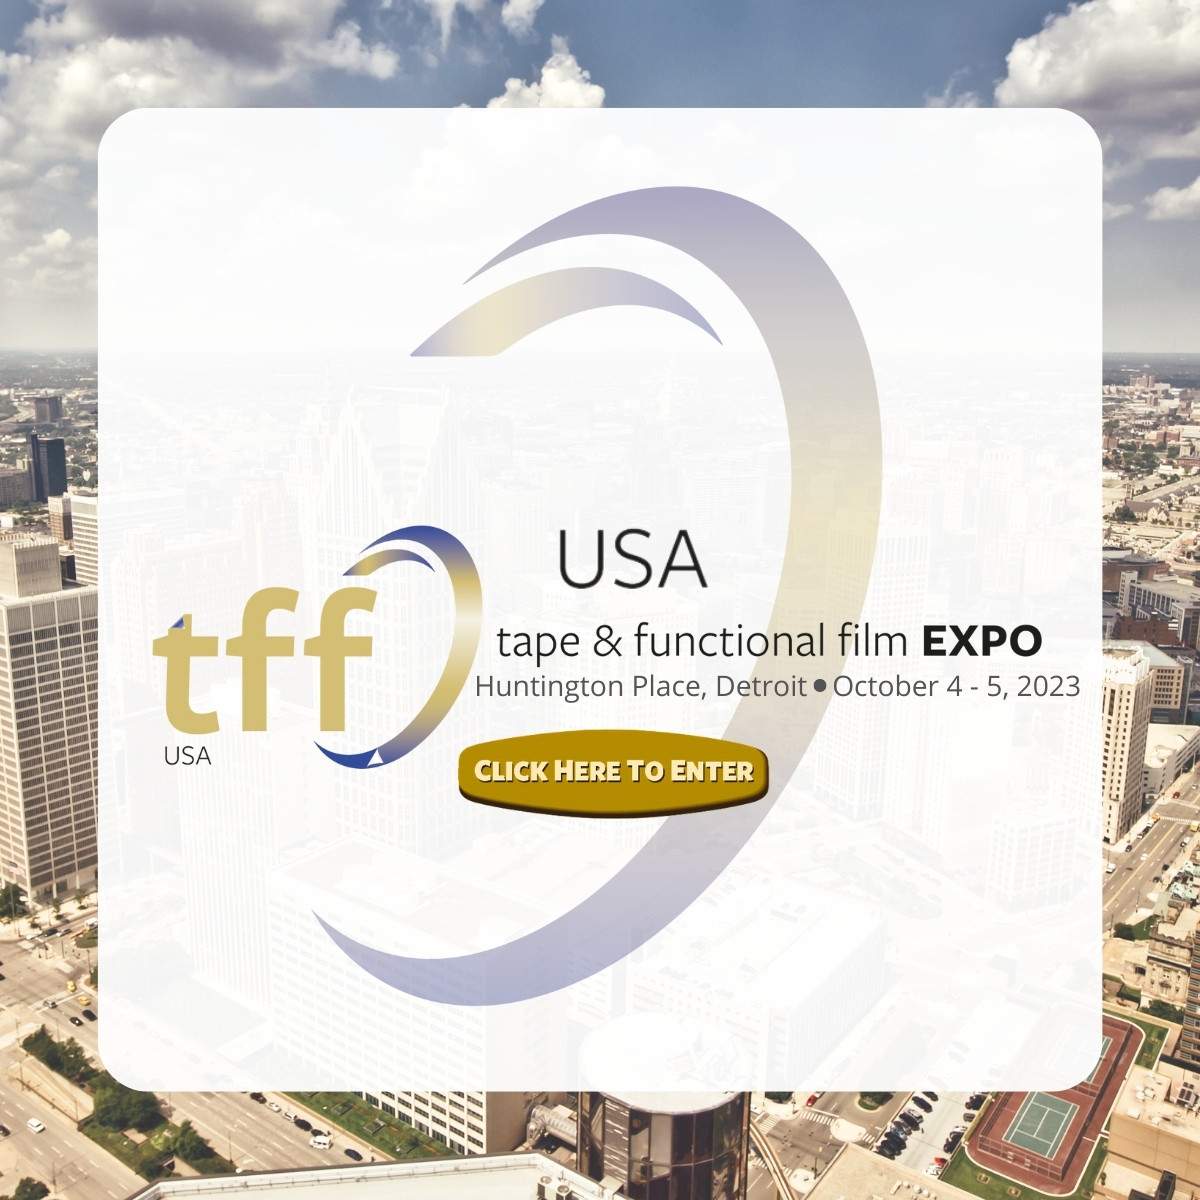 Logo for tff USA. USA Tape & functional film Expo at Huntington Place, Detroit, 4th to 5th October 2023. Gold button with white text 'click here to enter'